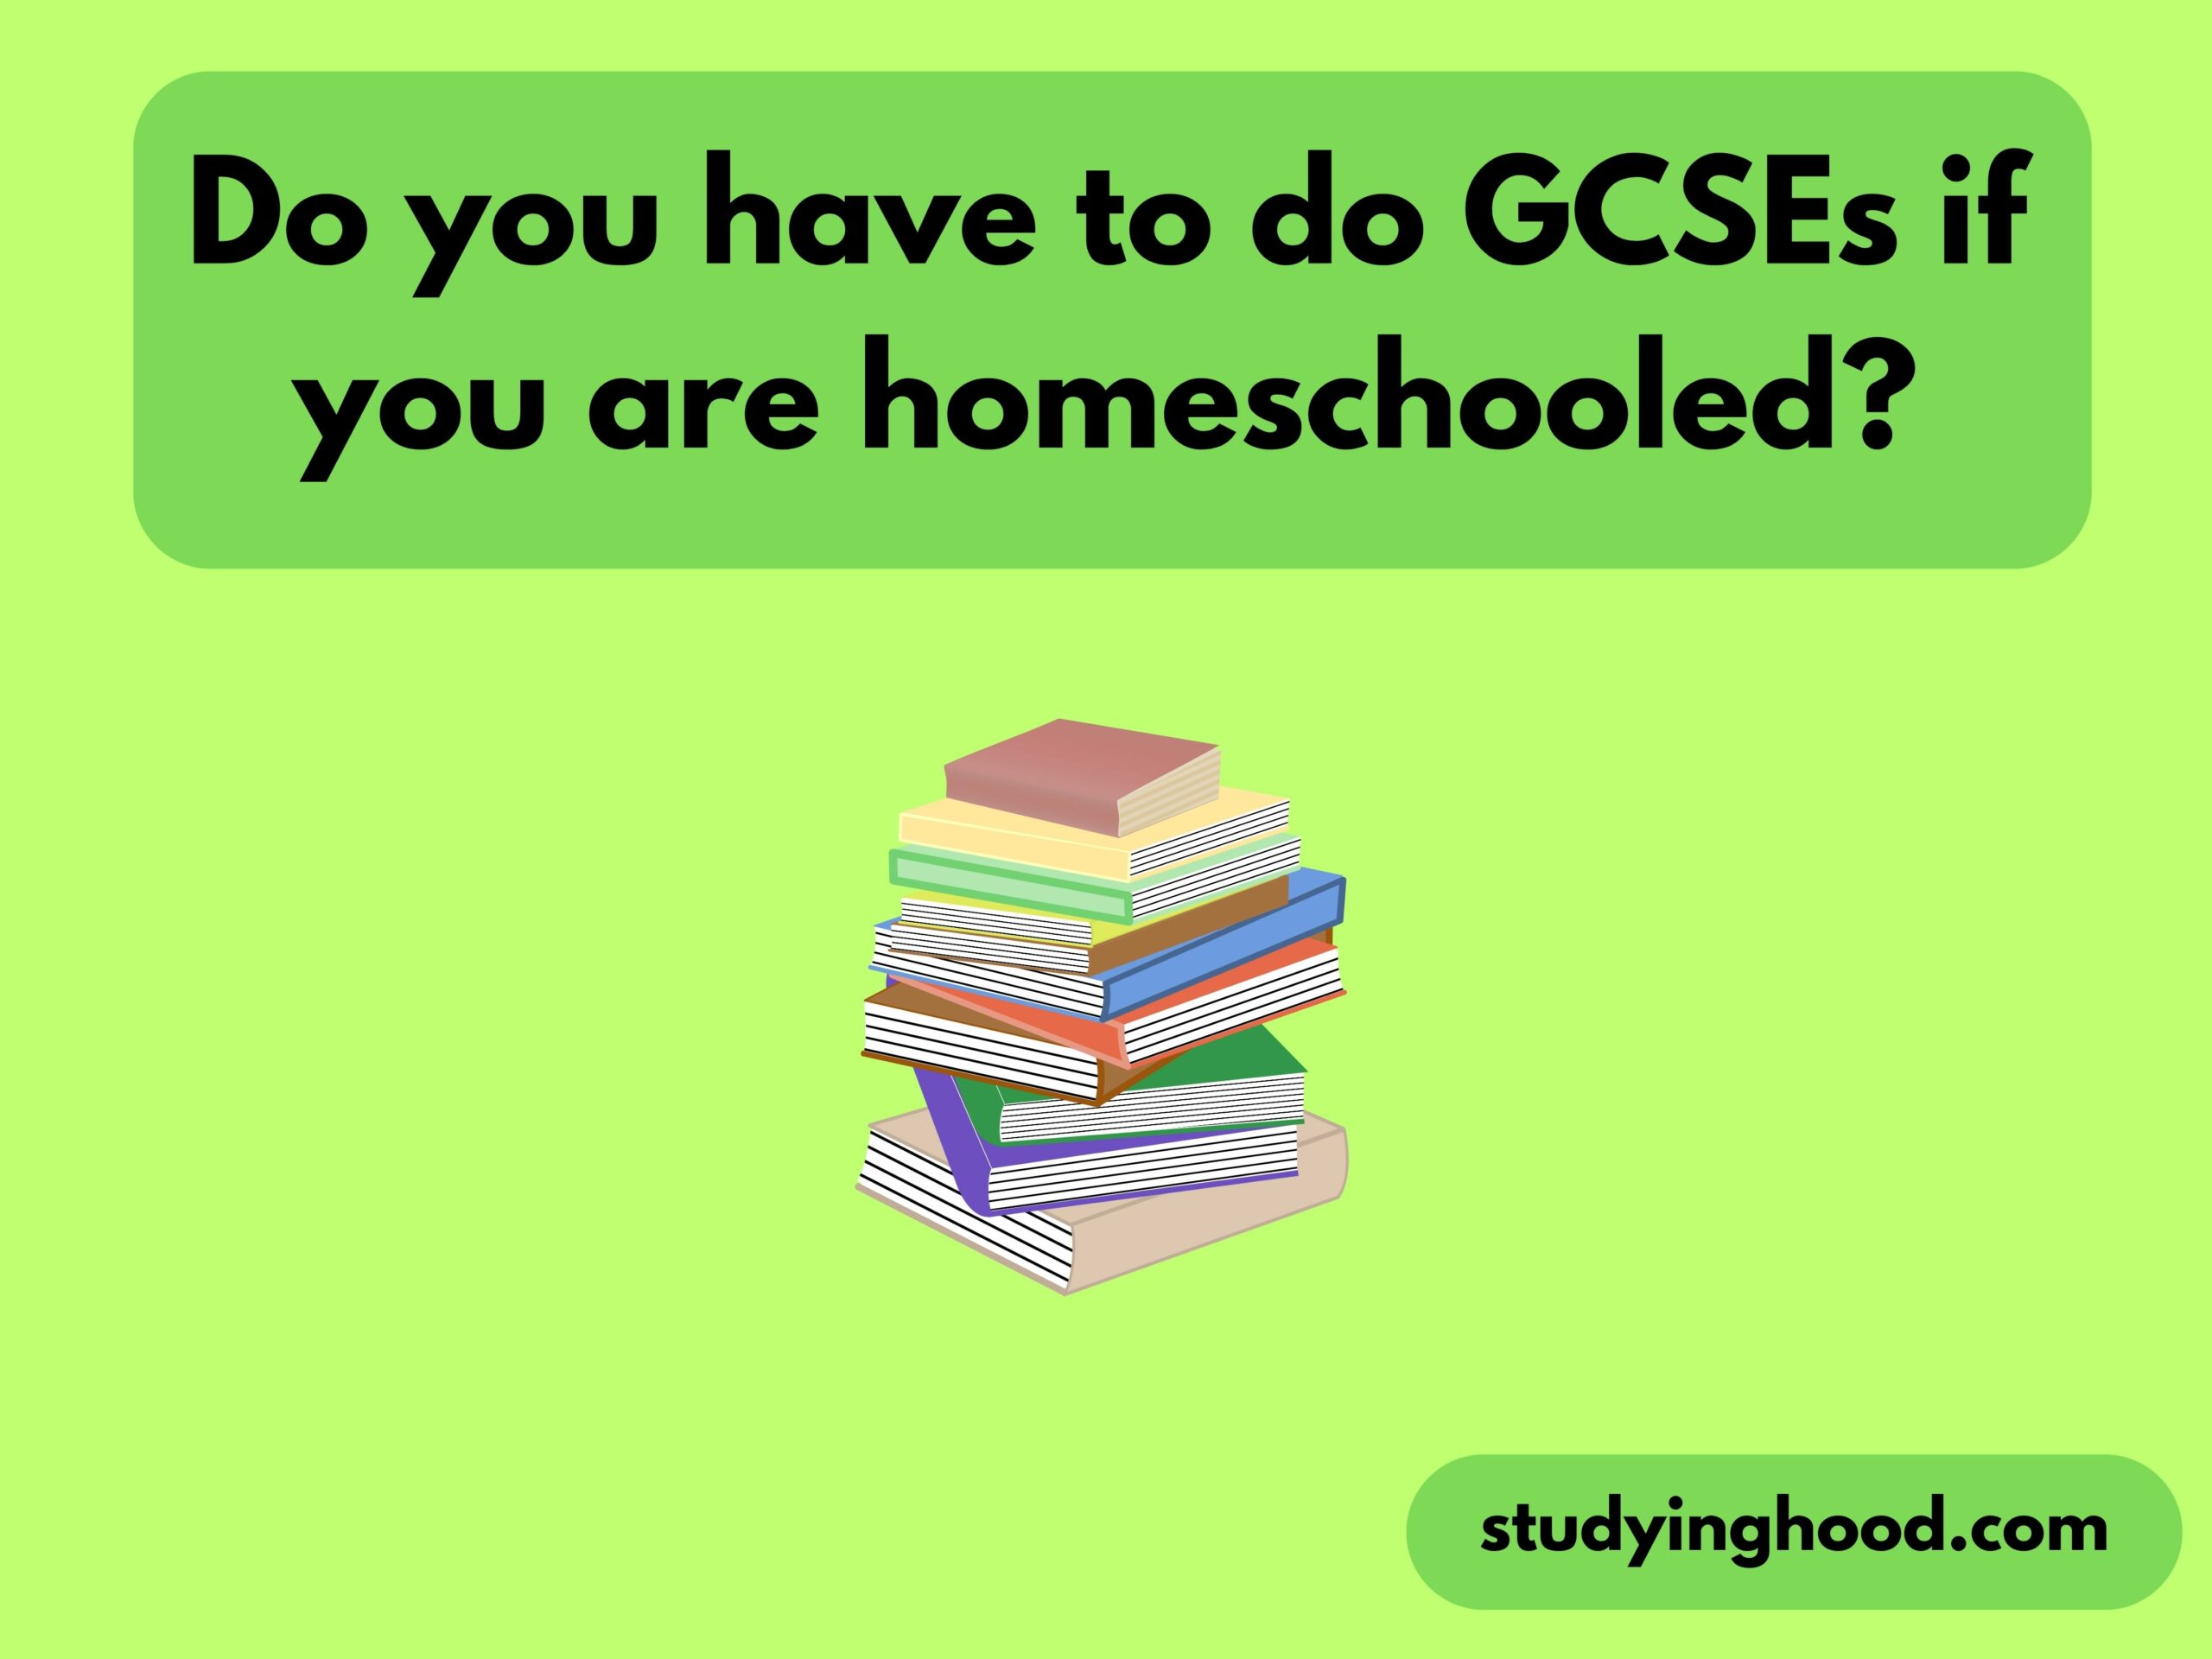 Do you have to do GCSEs if you are homeschooled?